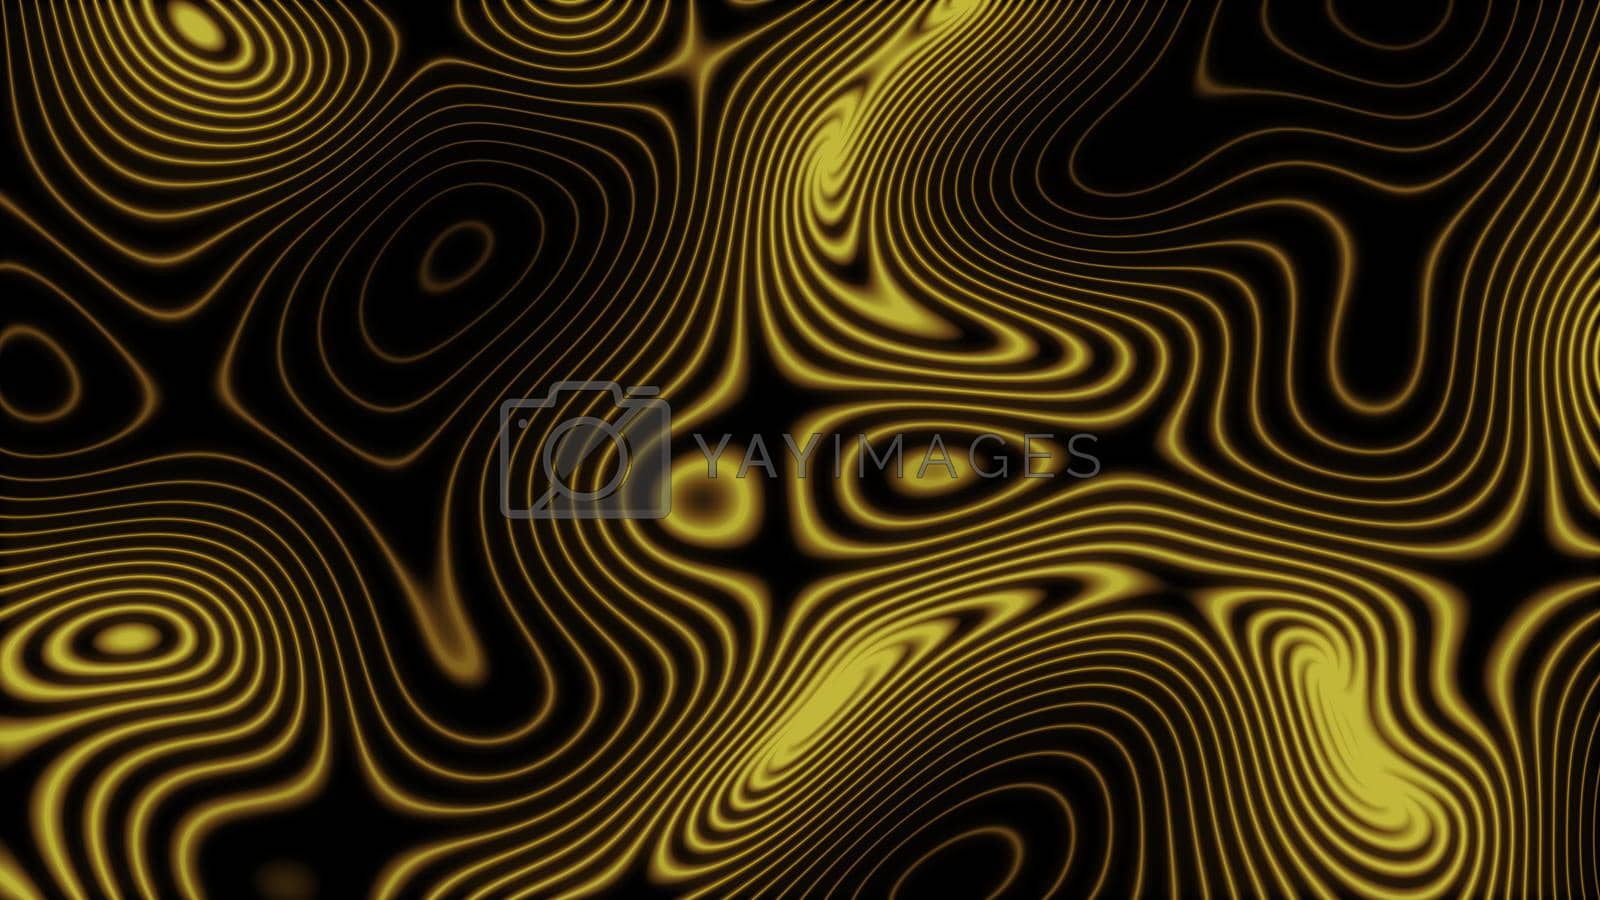 Golden abstract background. texture pattern